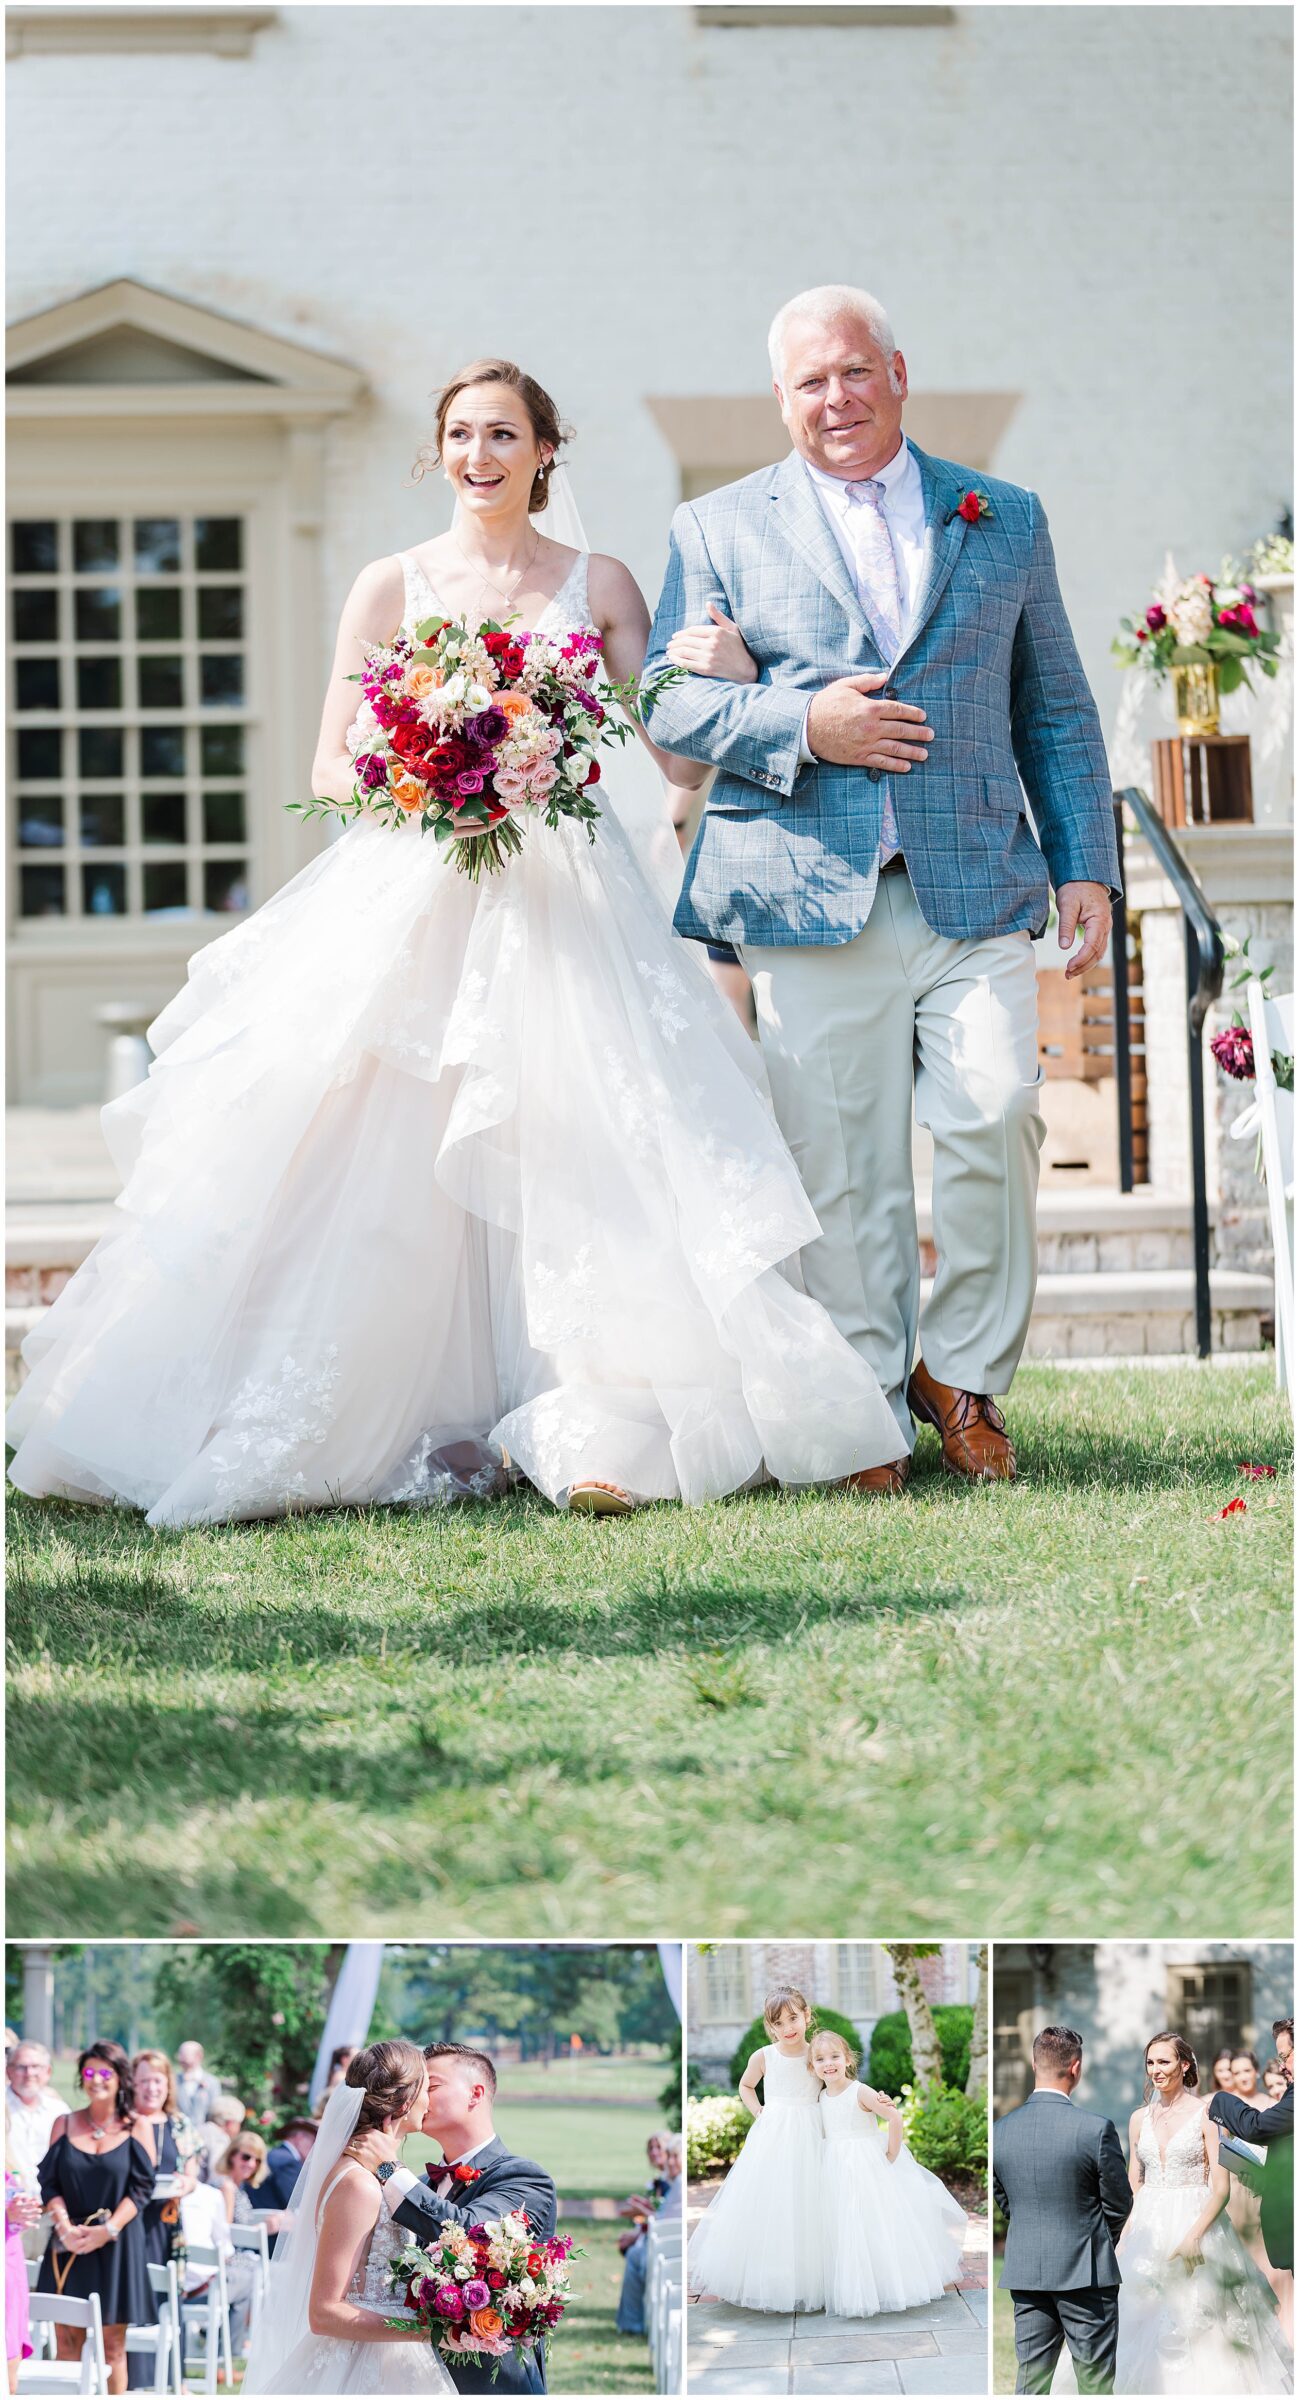 Ceremony images from Williamsburg Inn wedding